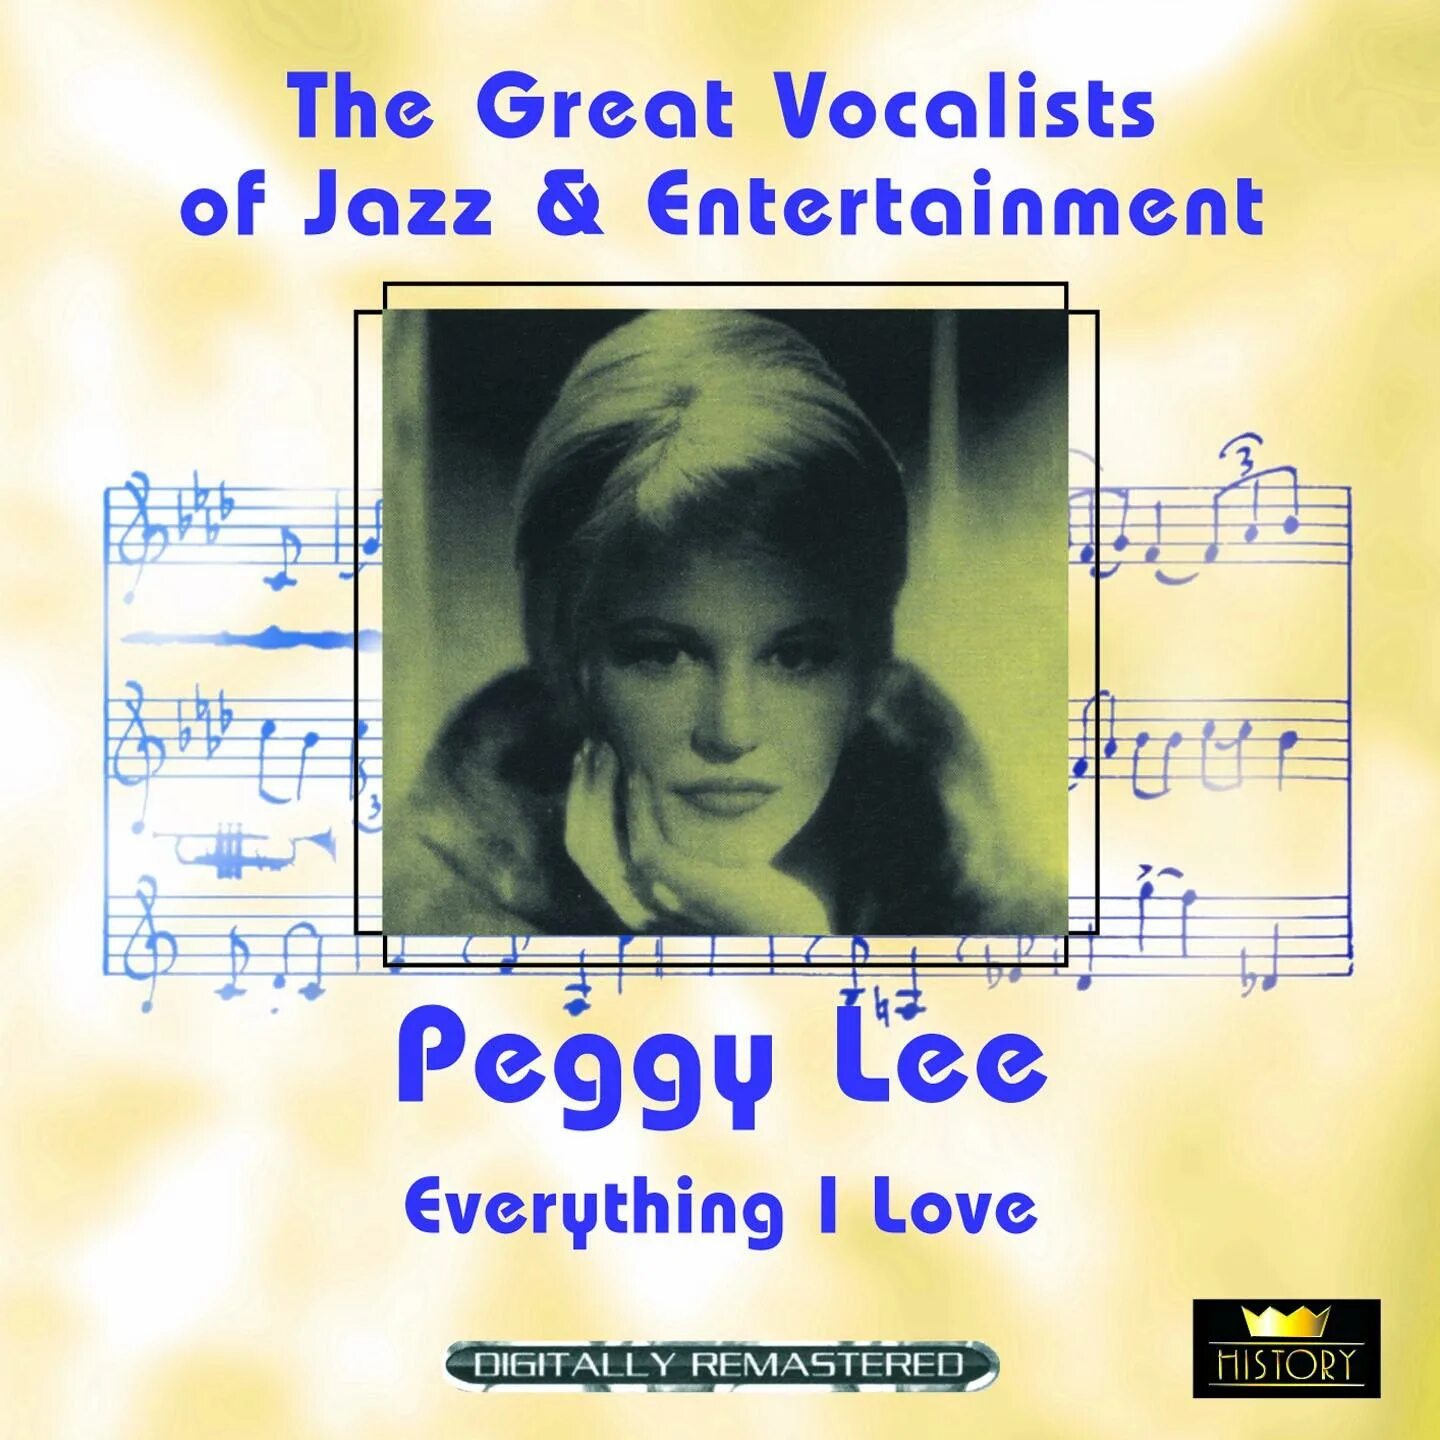 Peggy it goes like. Peggy Lee Love. Peggy Lee ‎– Let's Love. Peggy Lee "i like men (LP)". Peggy Lee why don't you do right (get me some money too).